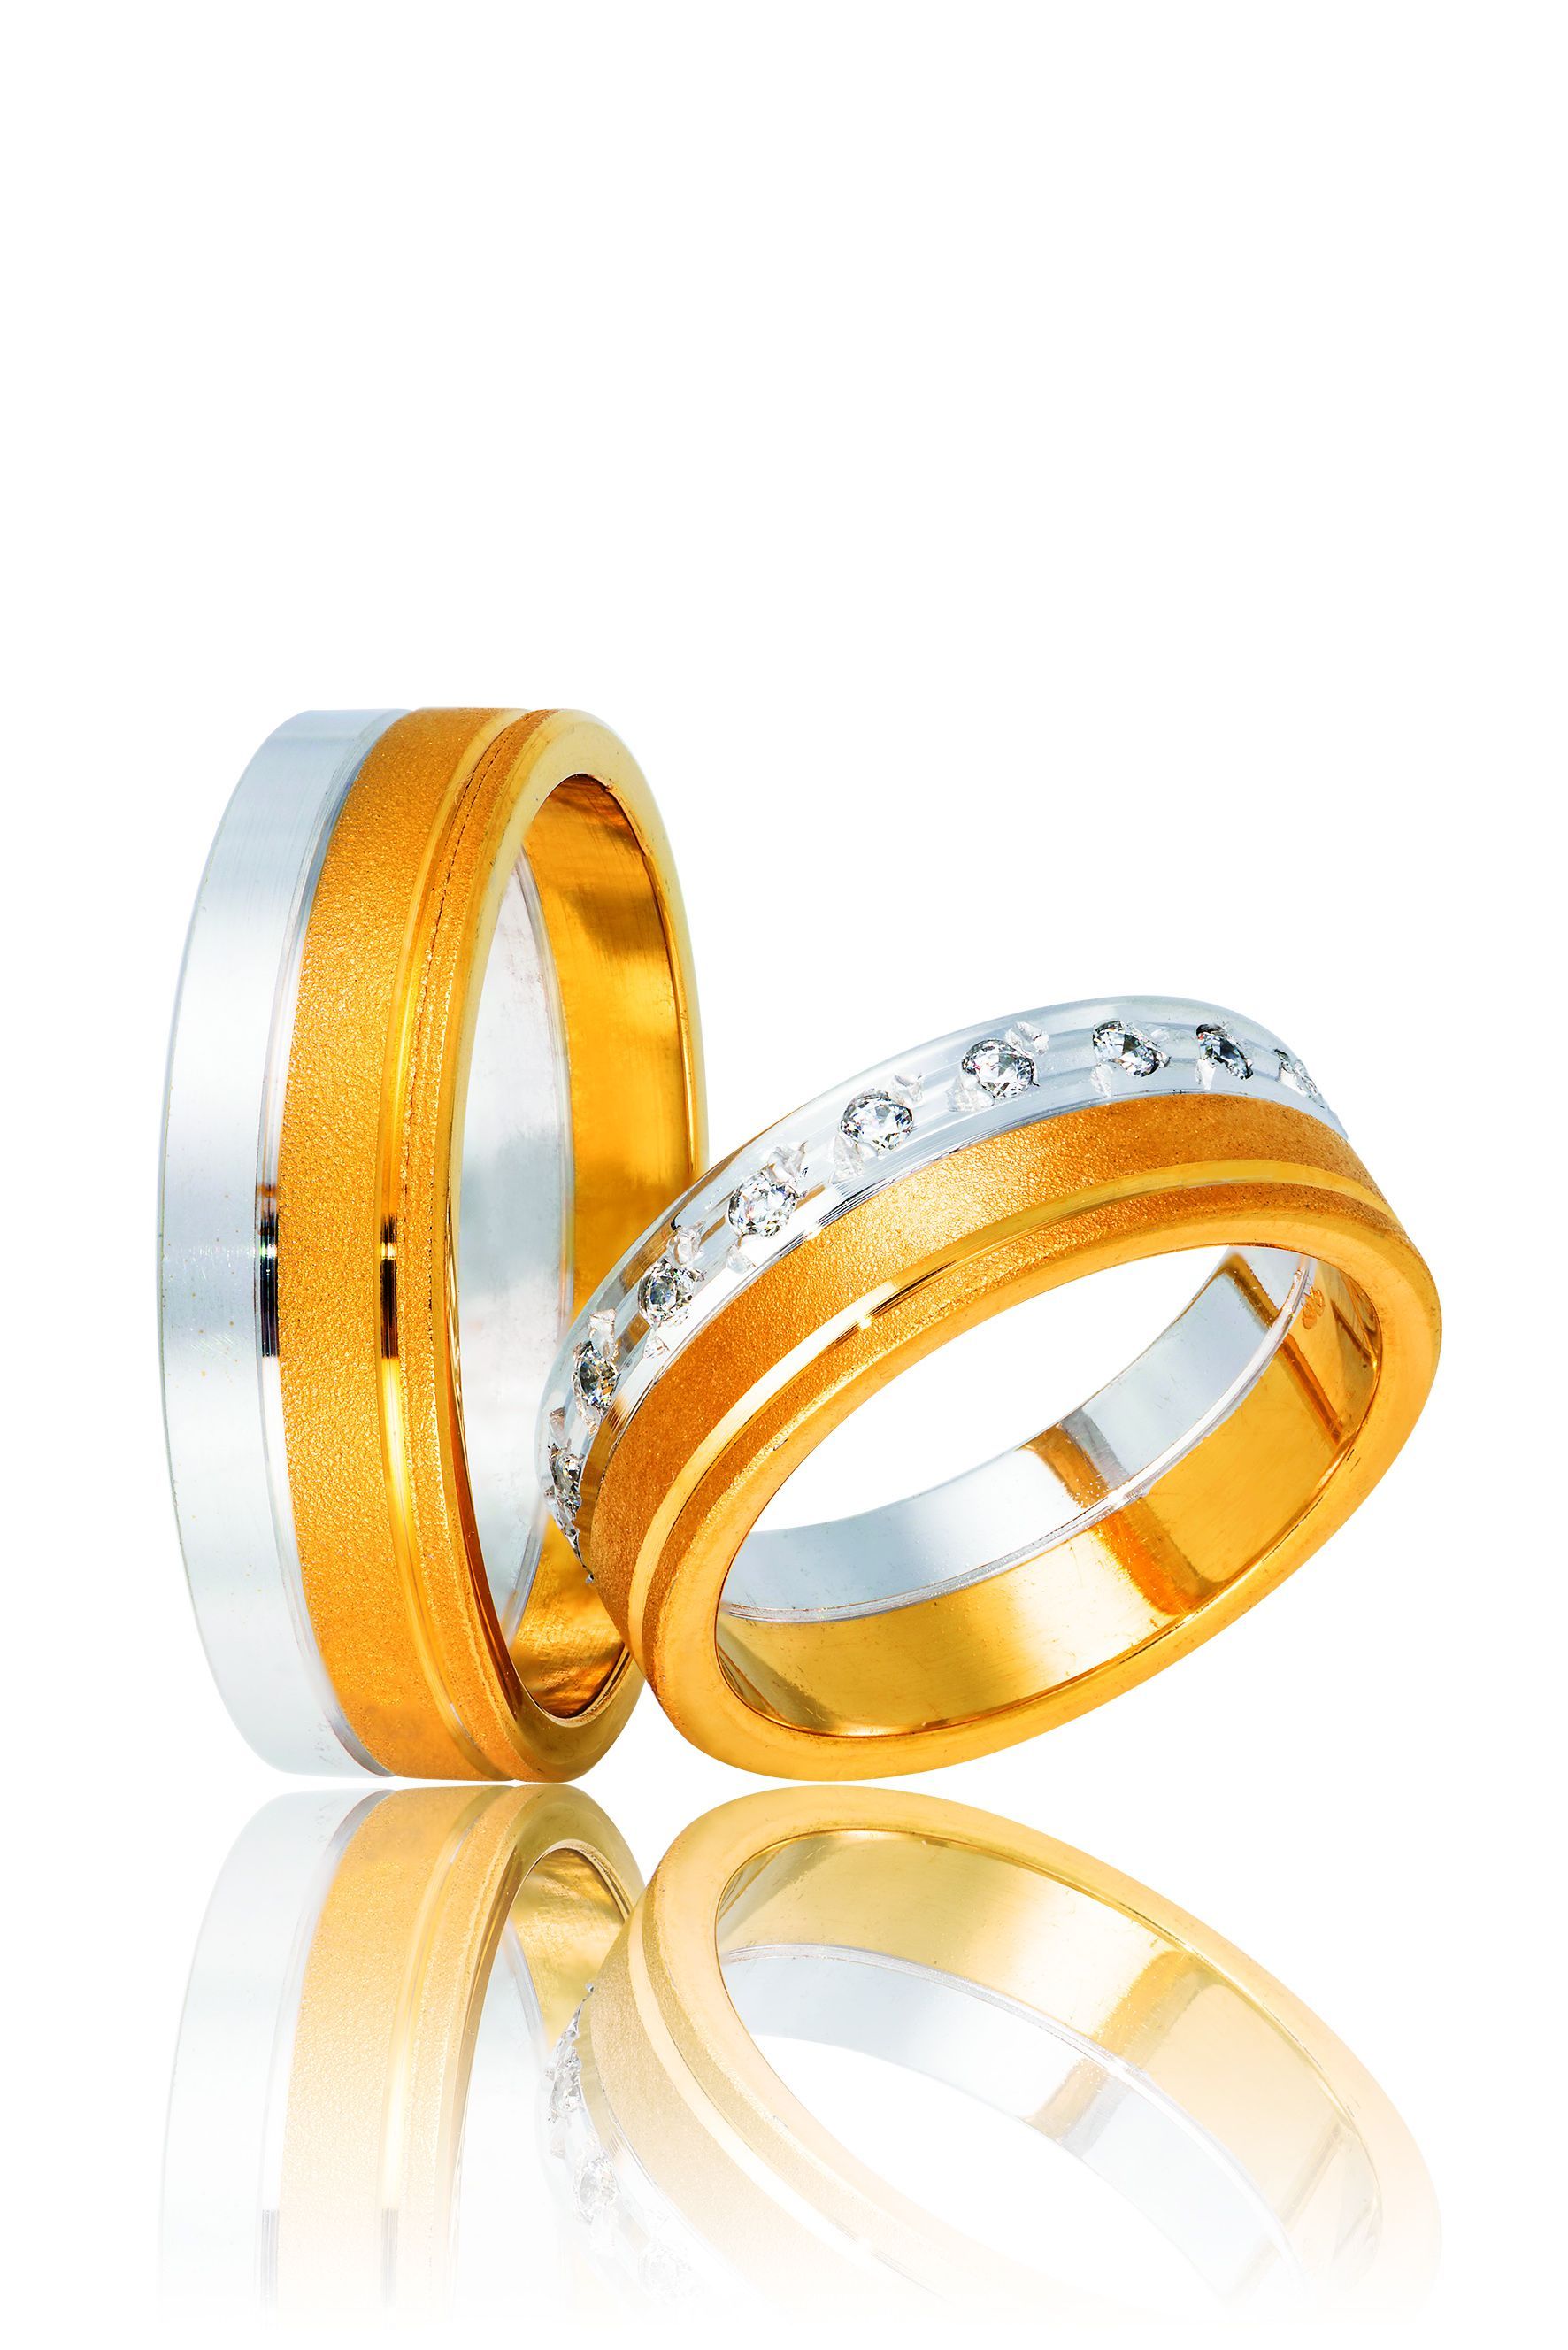 White gold & gold wedding rings 6.5mm (code 1Wy)